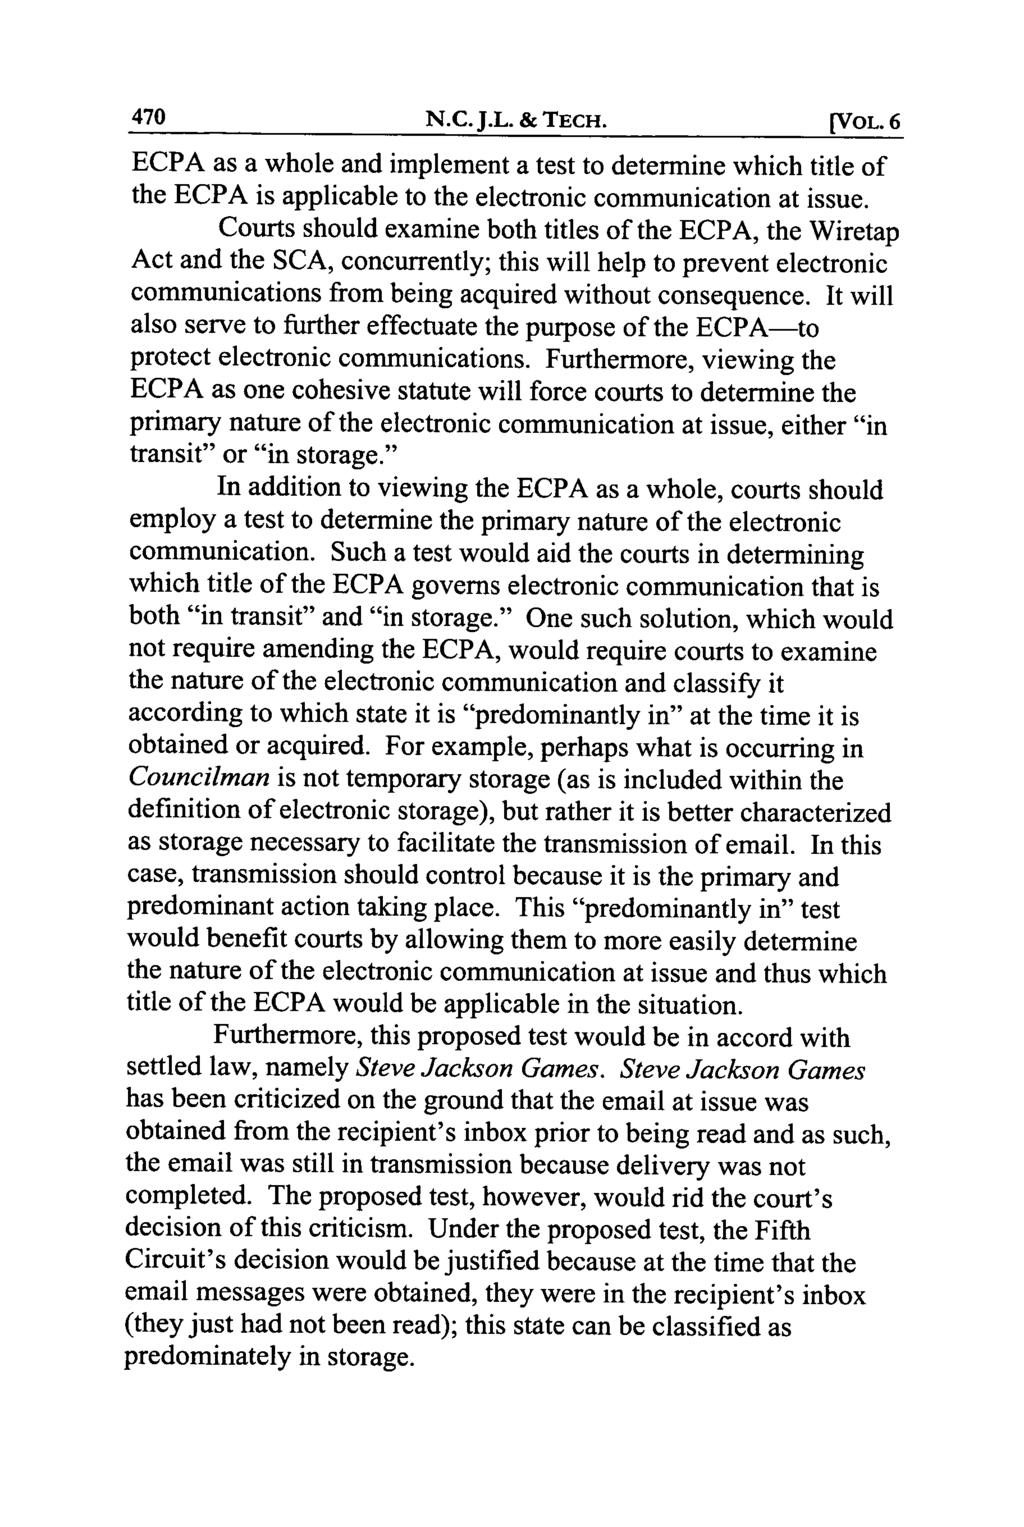 N.C. J.L. & TECH. [NVOL. 6 ECPA as a whole and implement a test to determine which title of the ECPA is applicable to the electronic communication at issue.